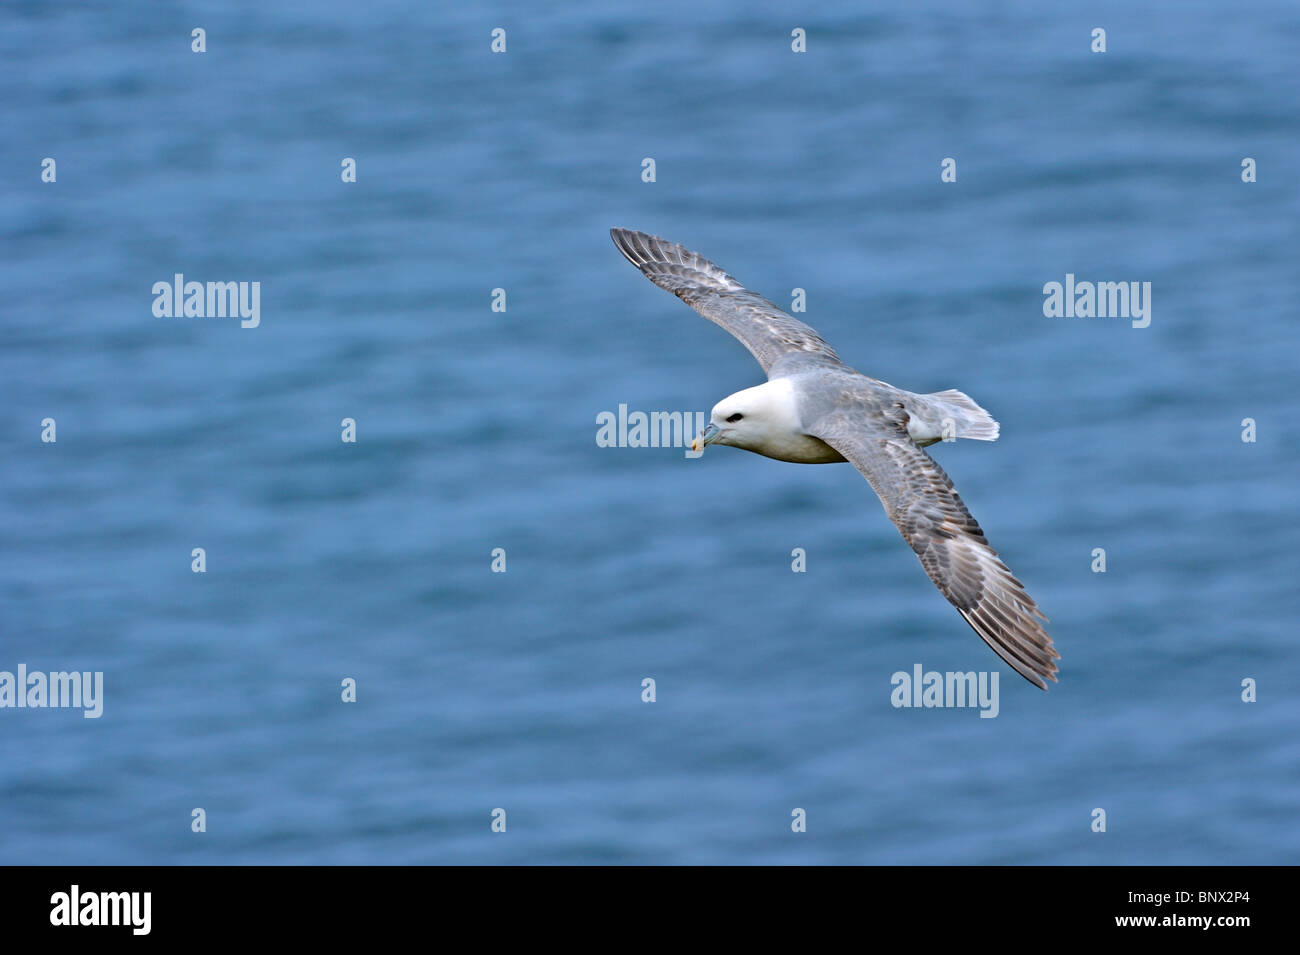 Northern Fulmar / Arctic Fulmar (Fulmarus glacialis) at flight over sea at the Fowlsheugh nature reserve, Scotland, UK Stock Photo